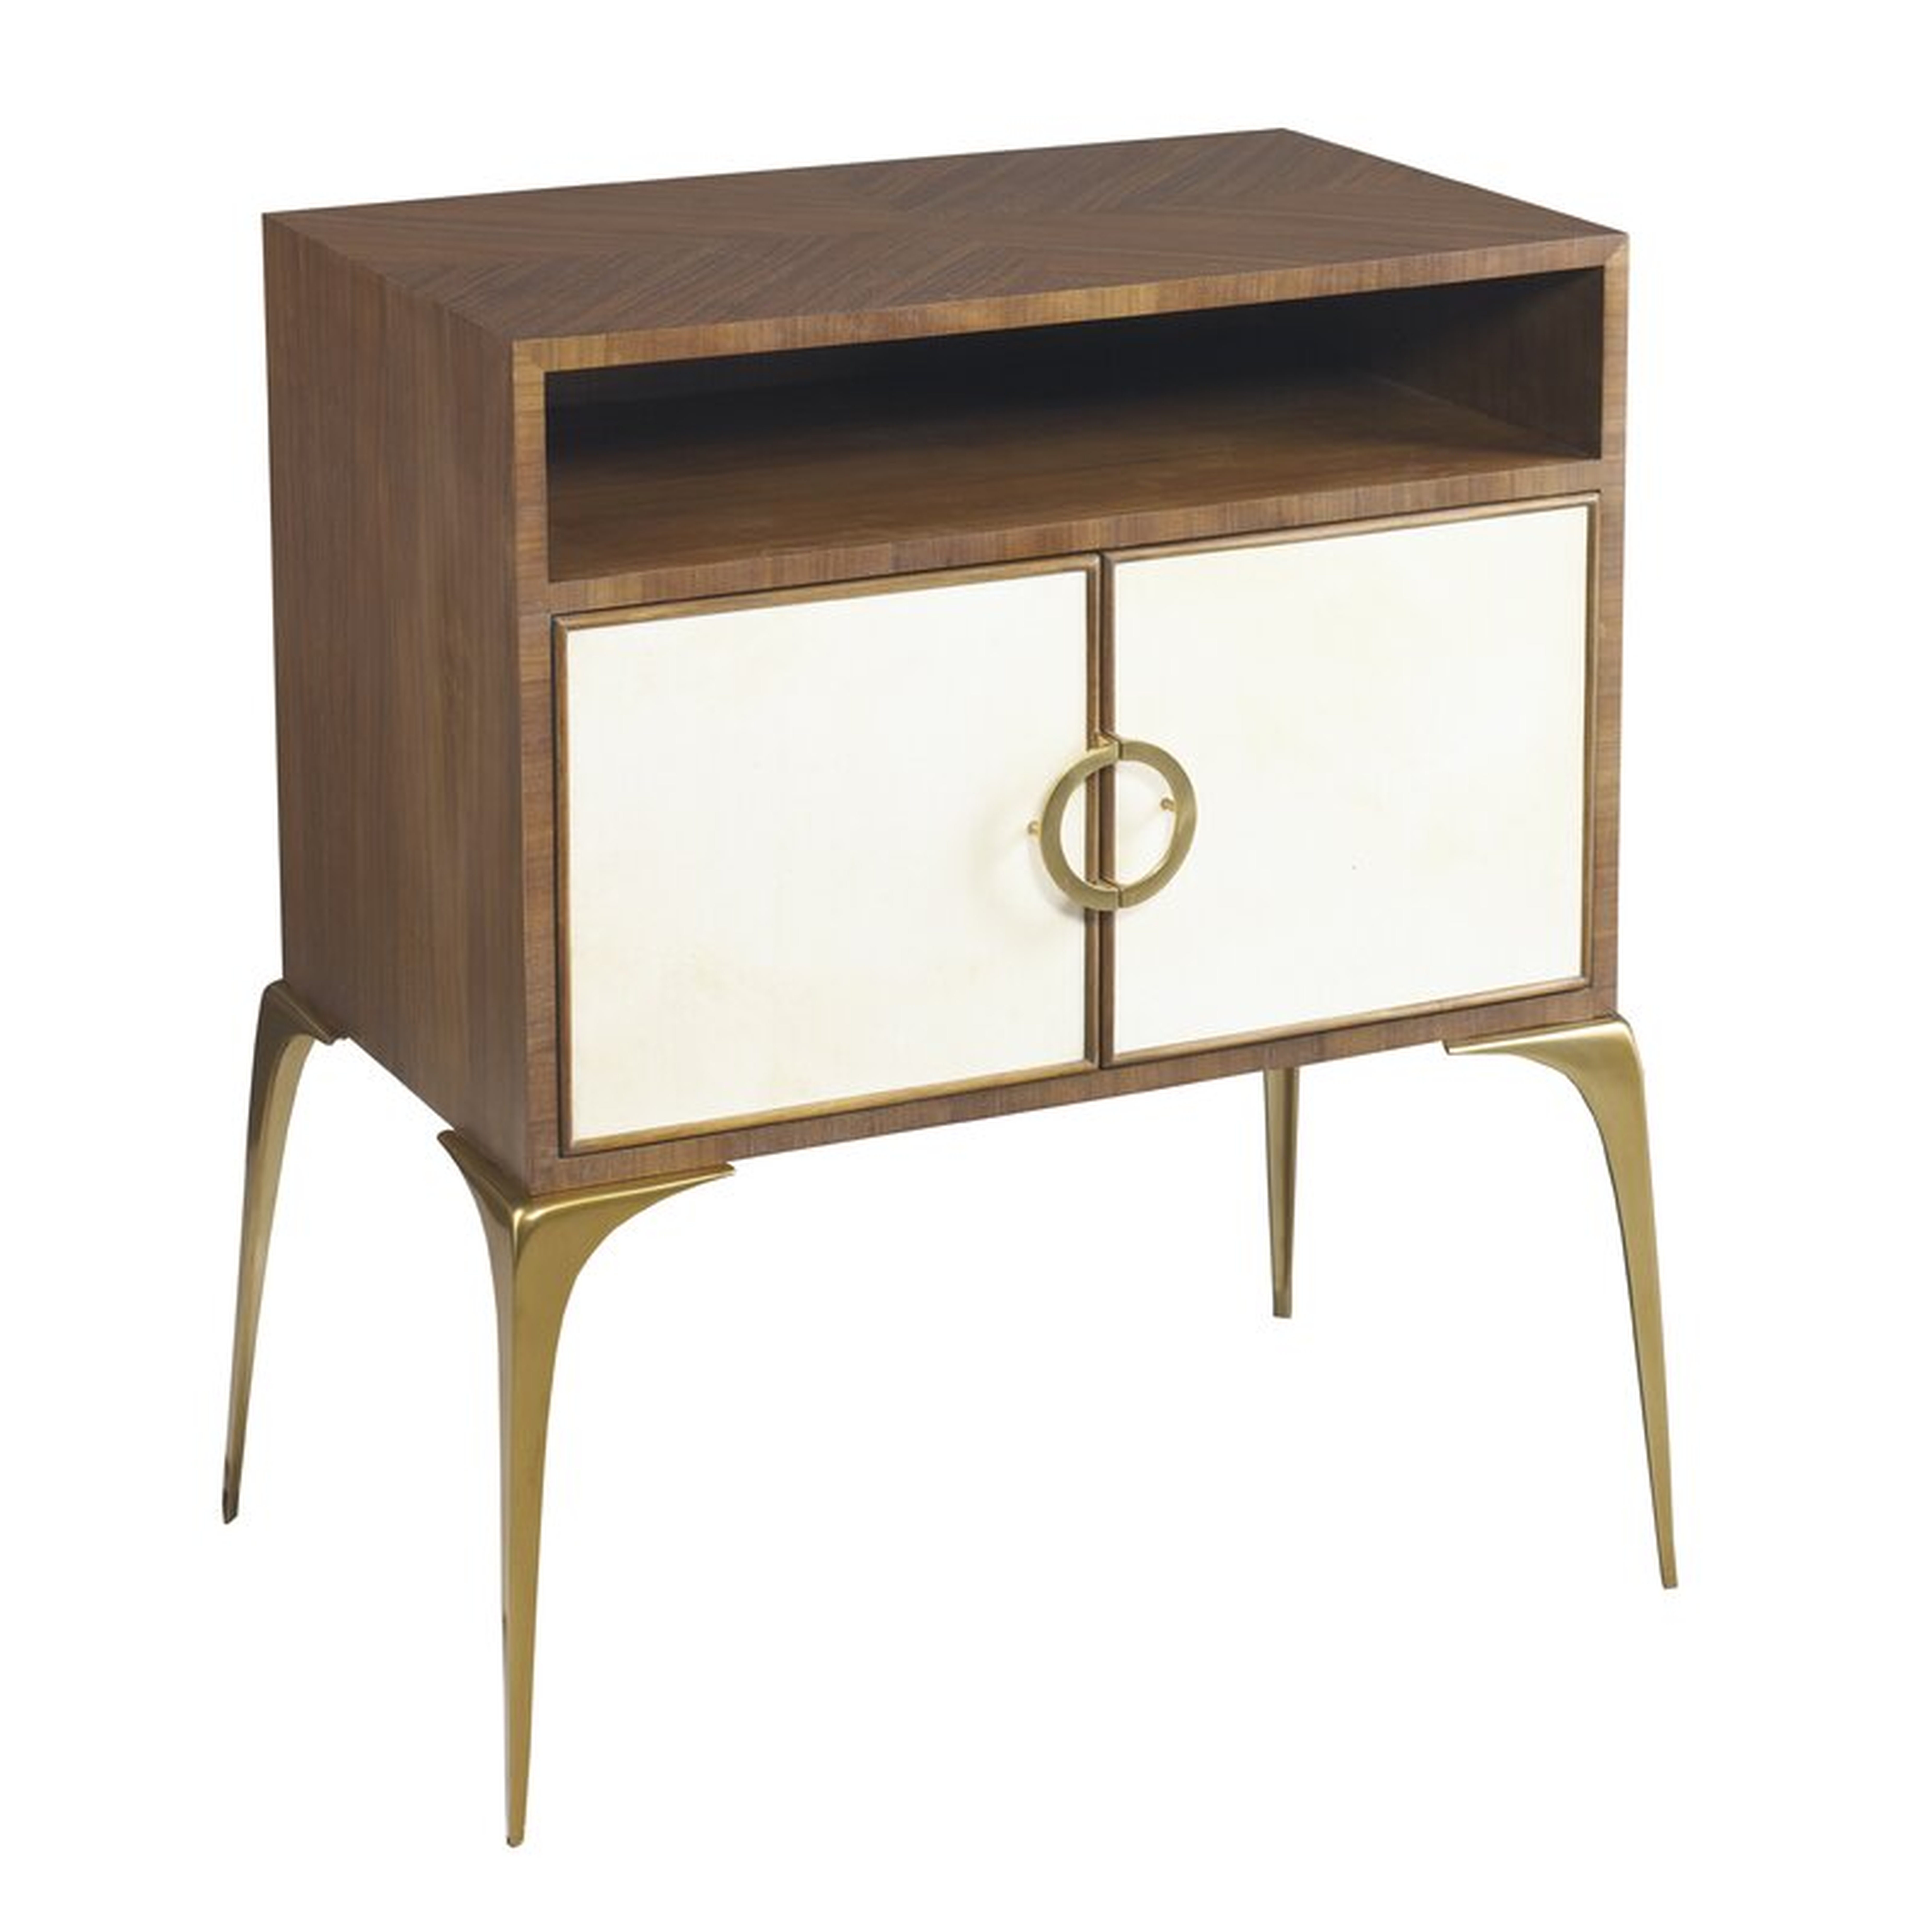 Lillian August Stiletto End Table with Storage - Perigold